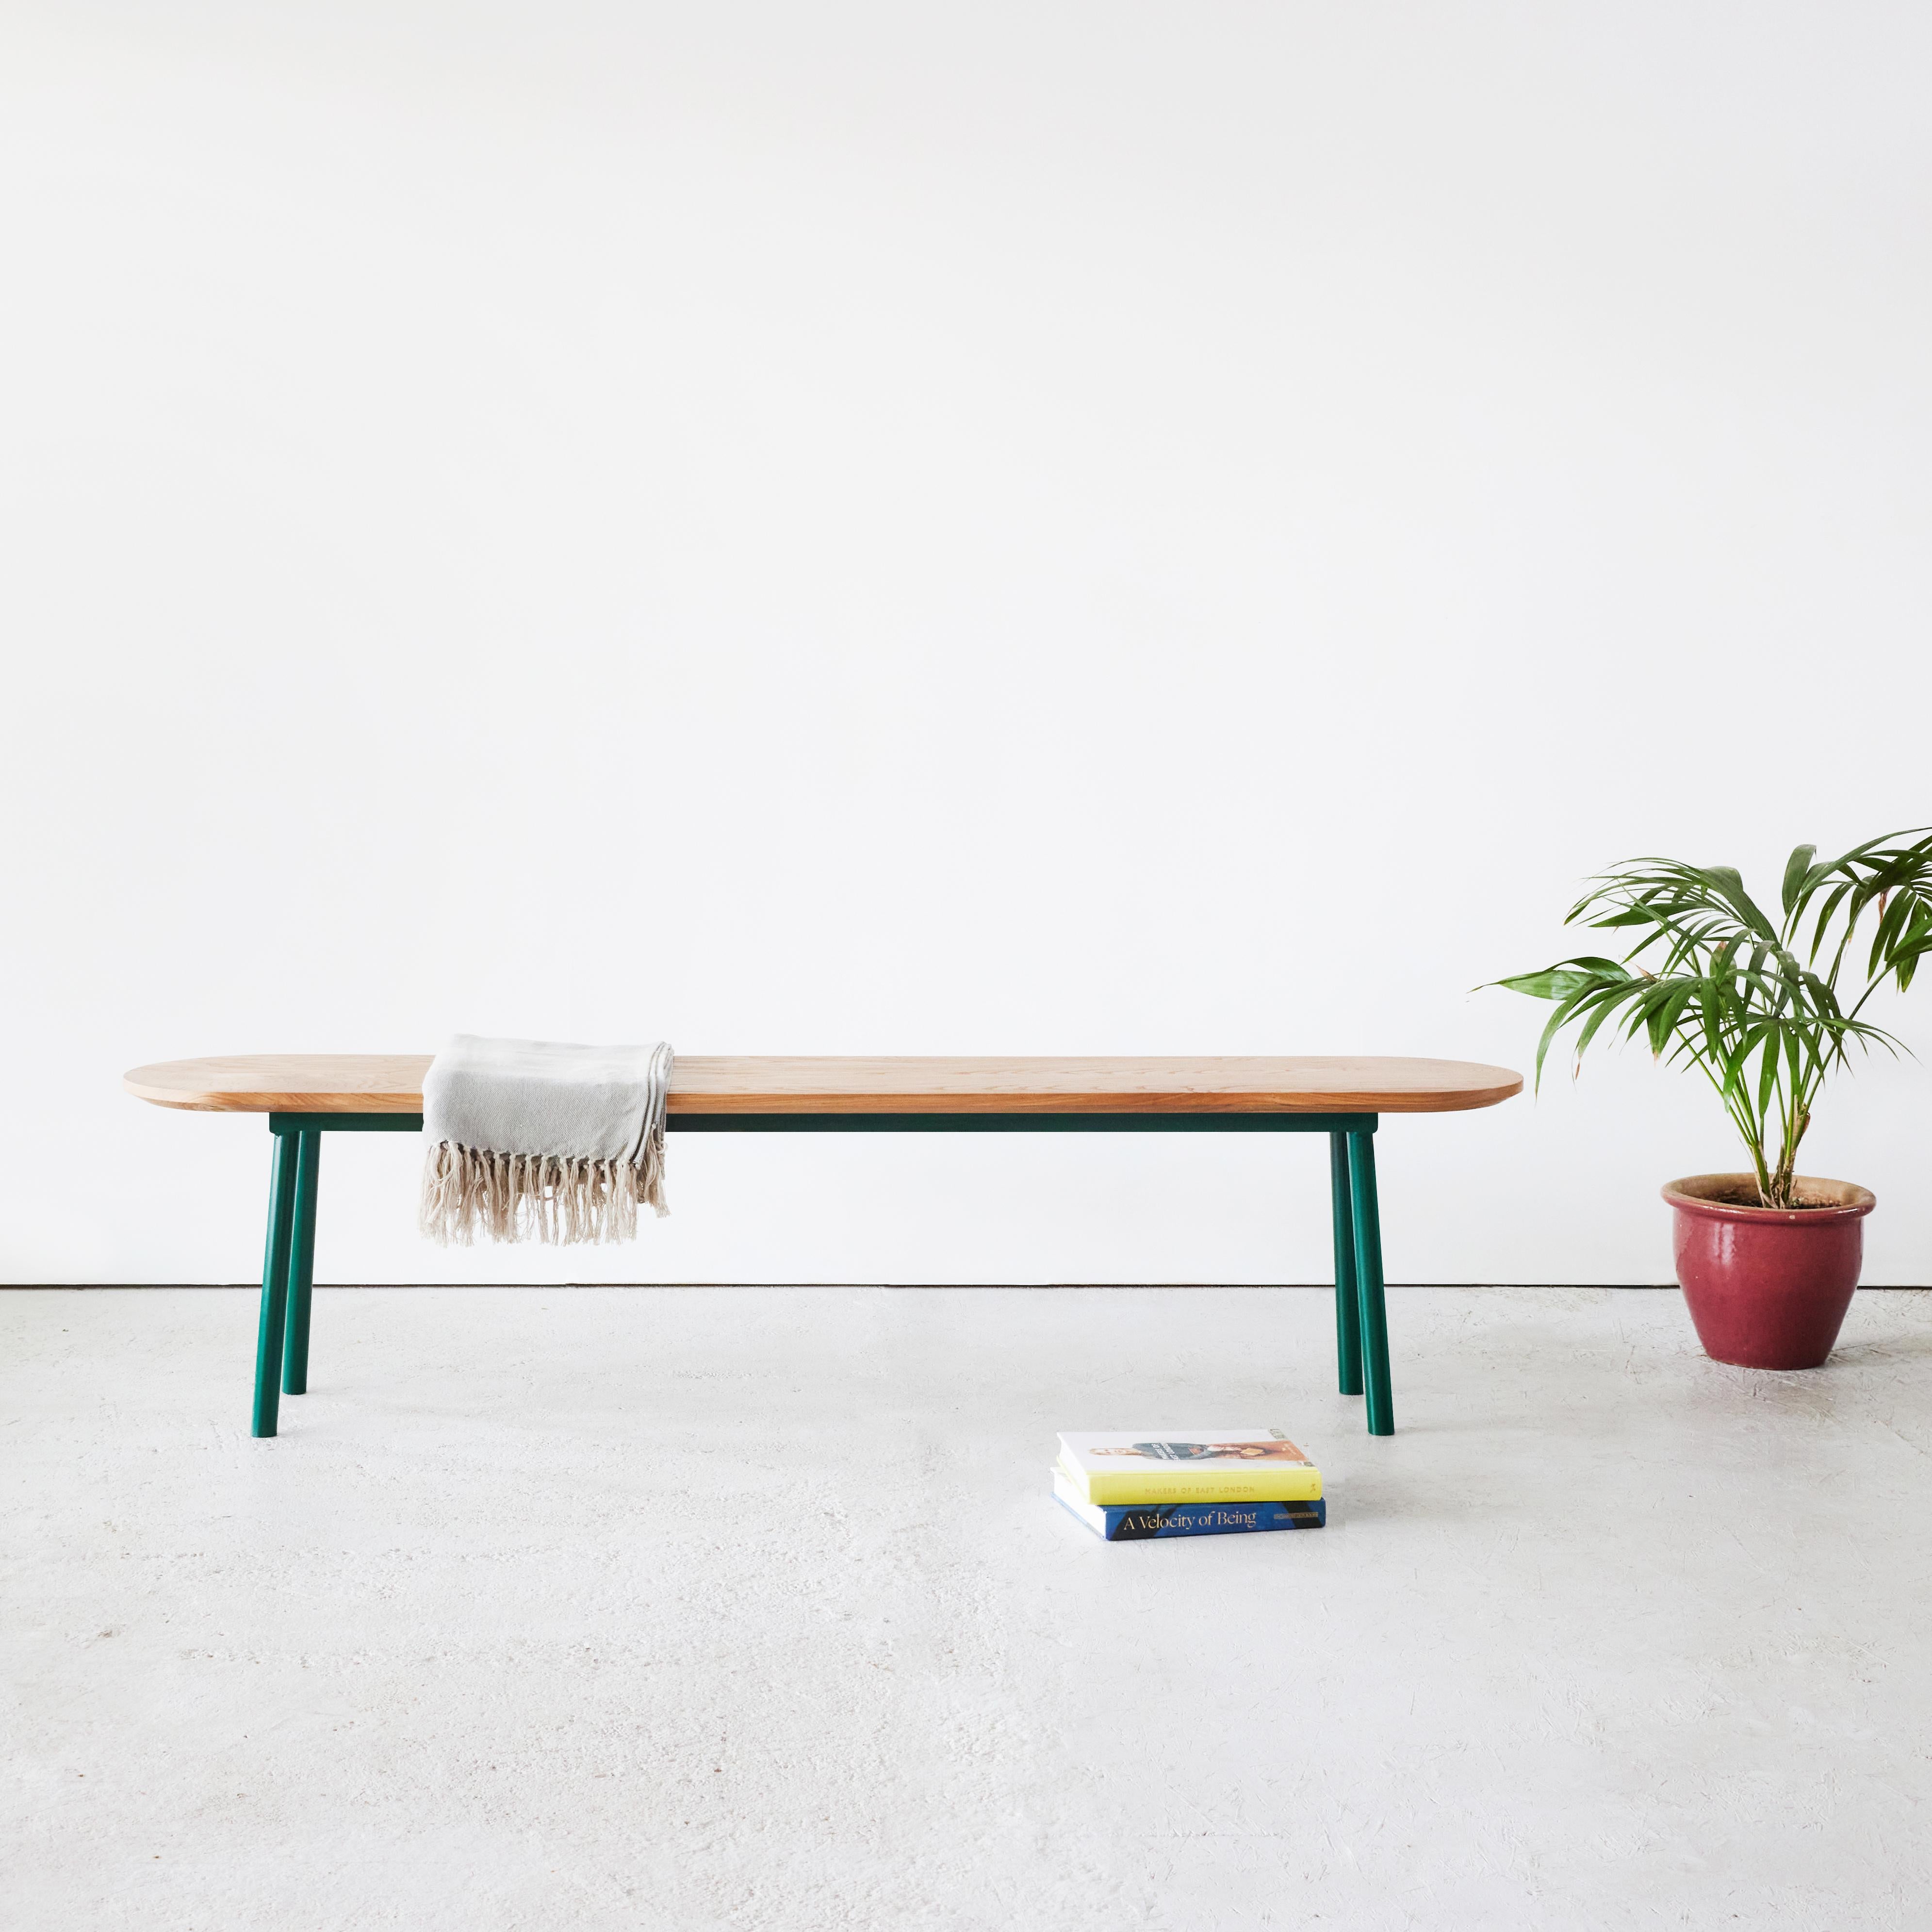 Contemporary and versatile, this bench unites style and comfort. Designed to fit perfectly with our Muse dining table, or to make a statement as a standalone piece.

With its striking yet simple form, the bench fits into a variety of living